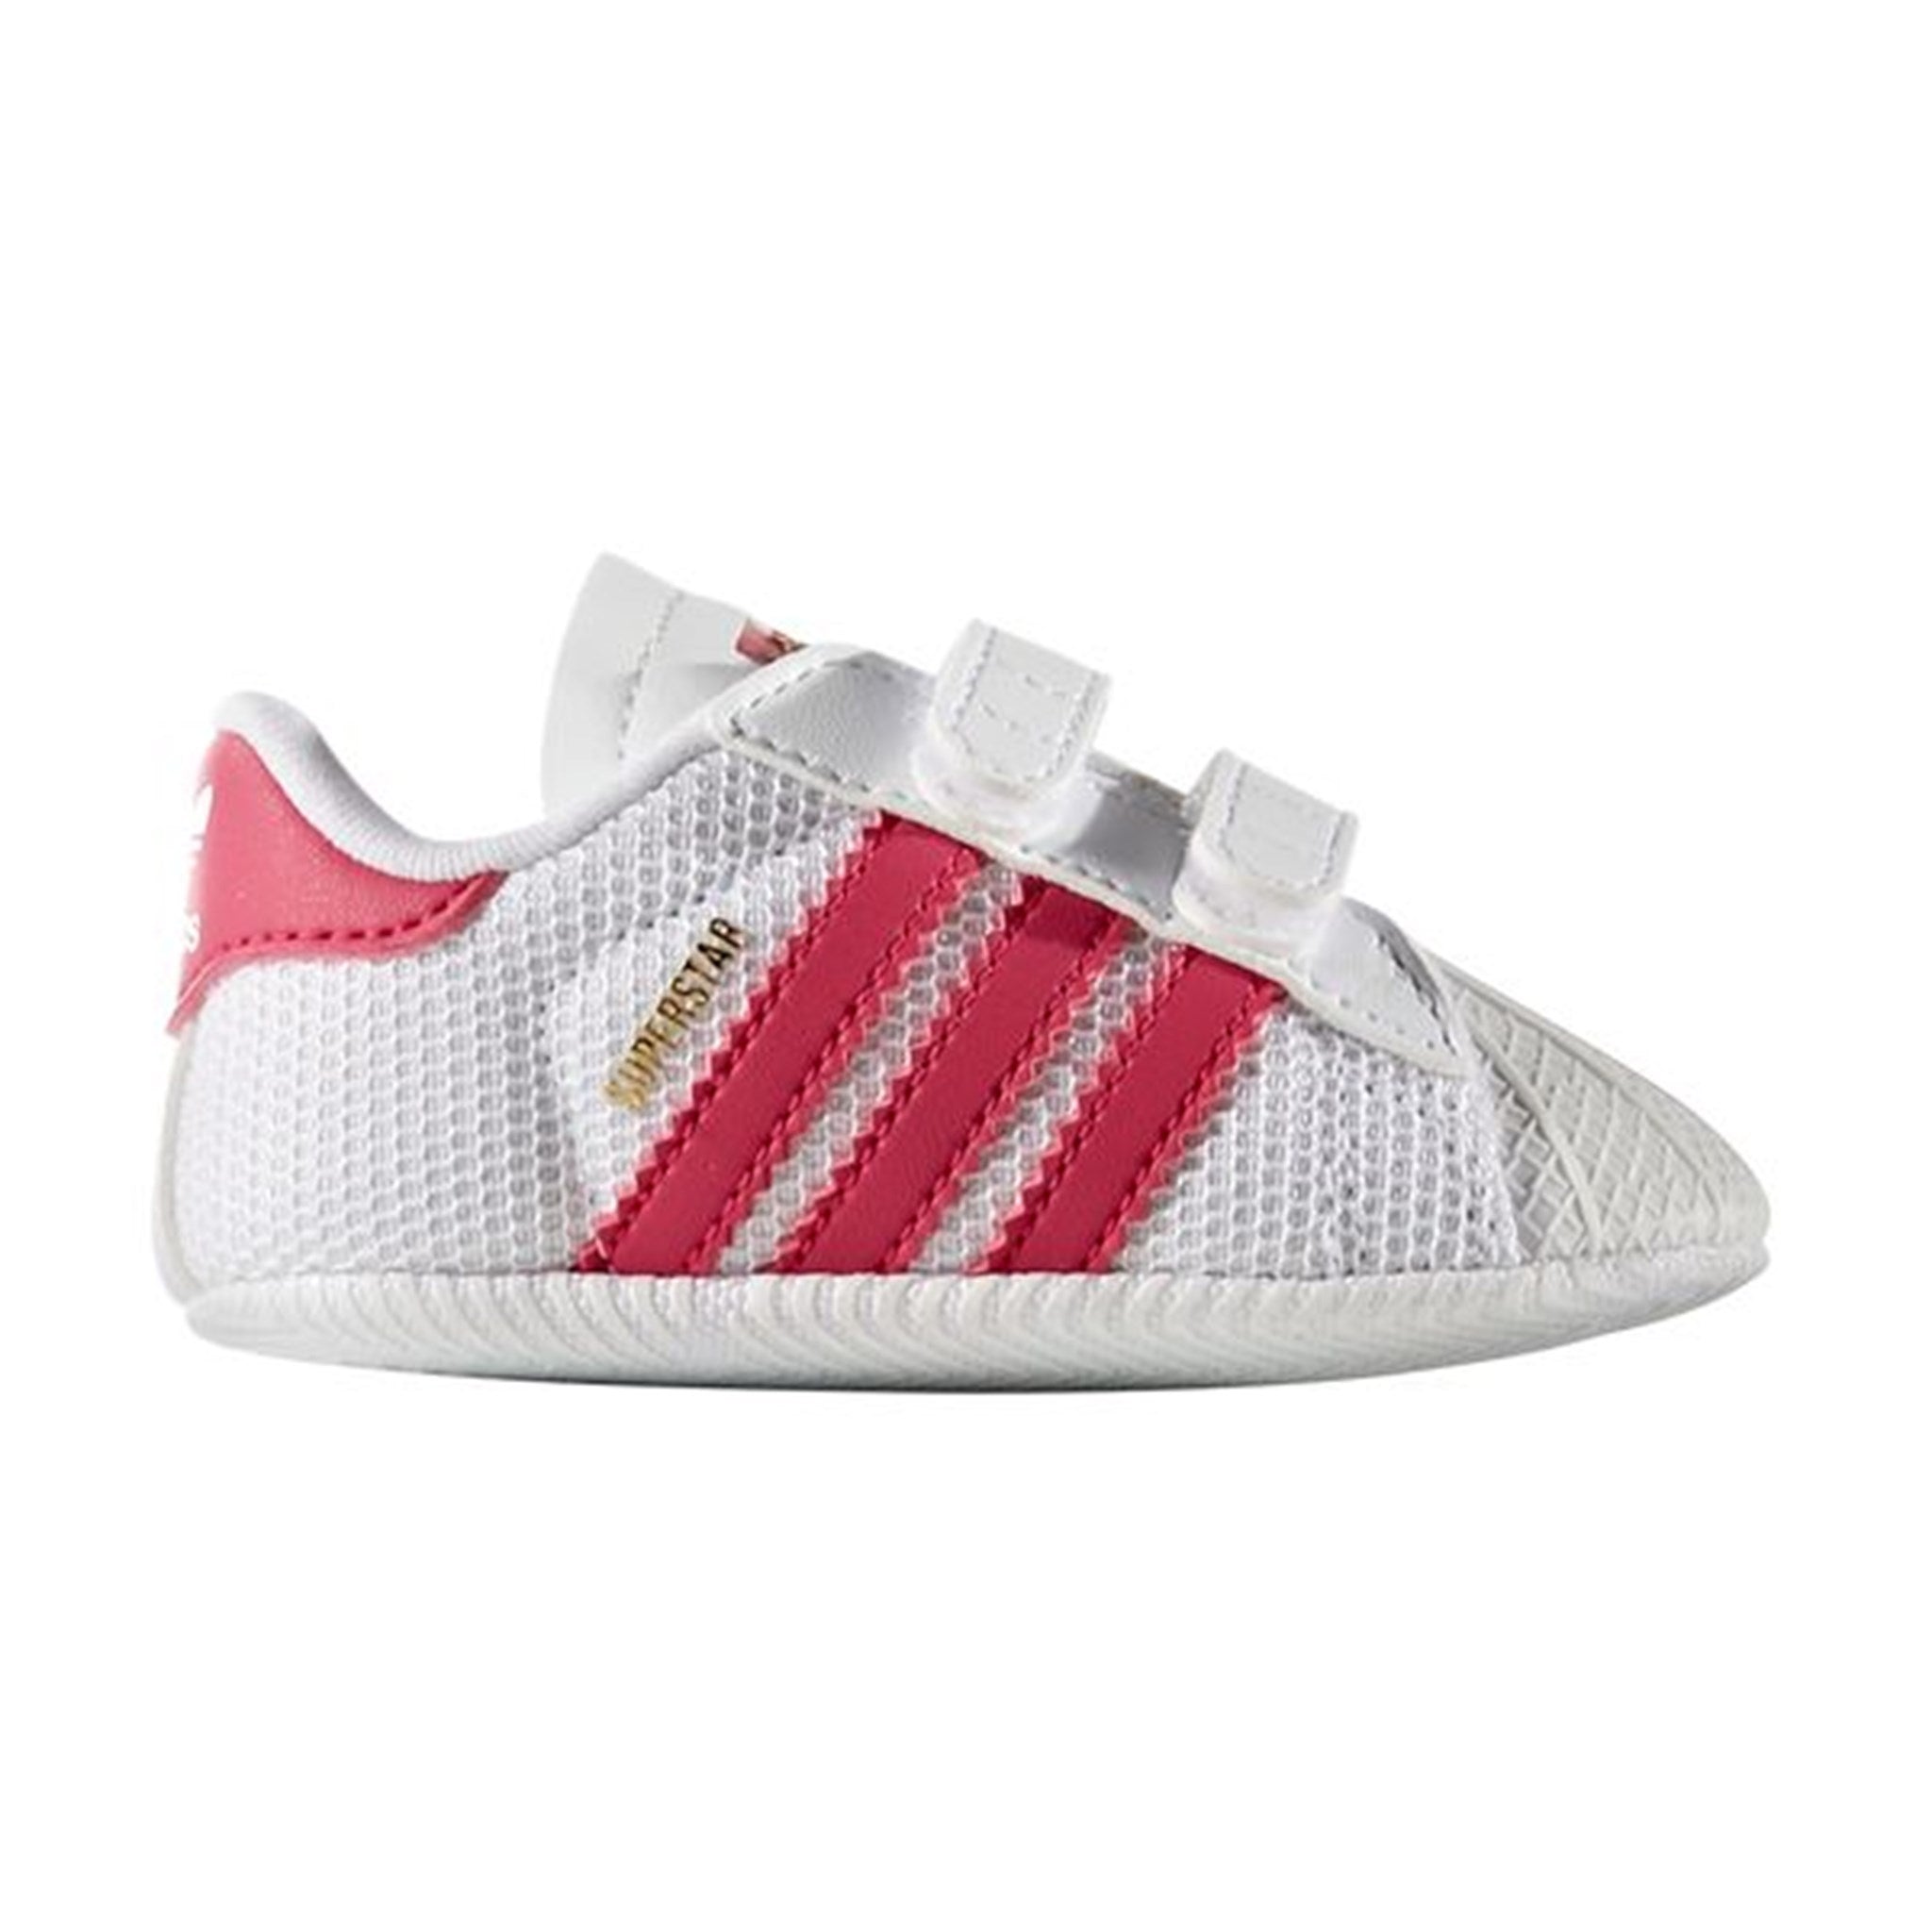 adidas Superstar Sneakers White/Pink S79917